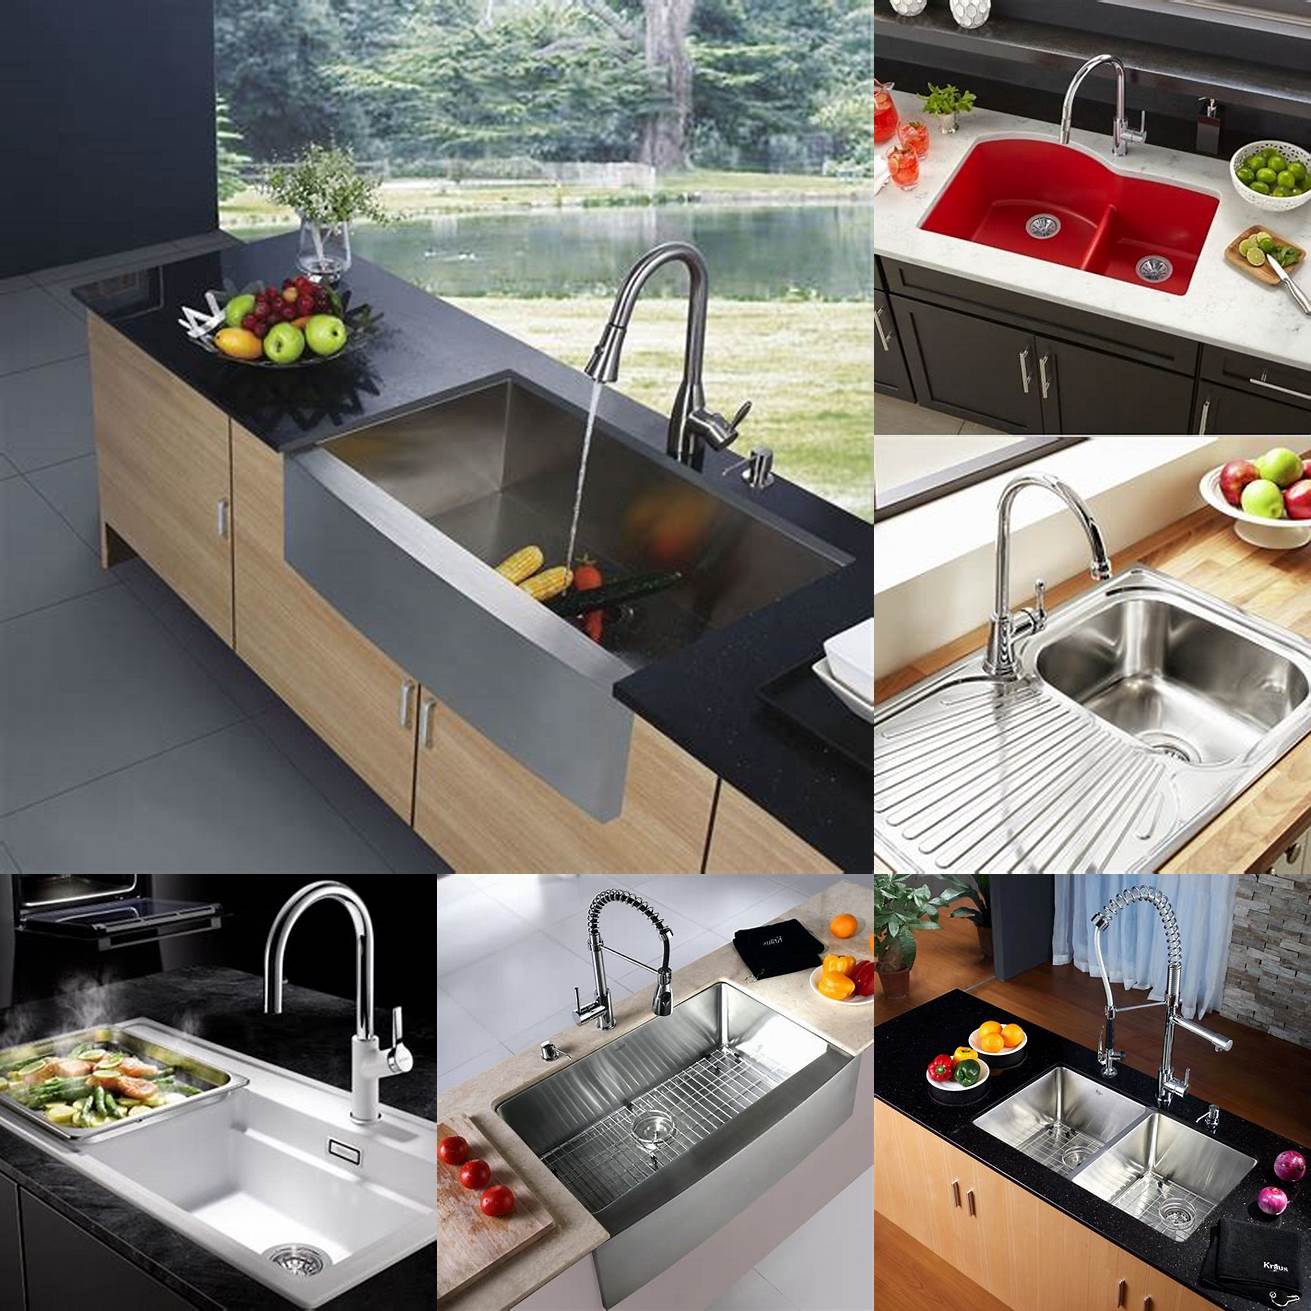 Choose the right size and style sink for your kitchens needs